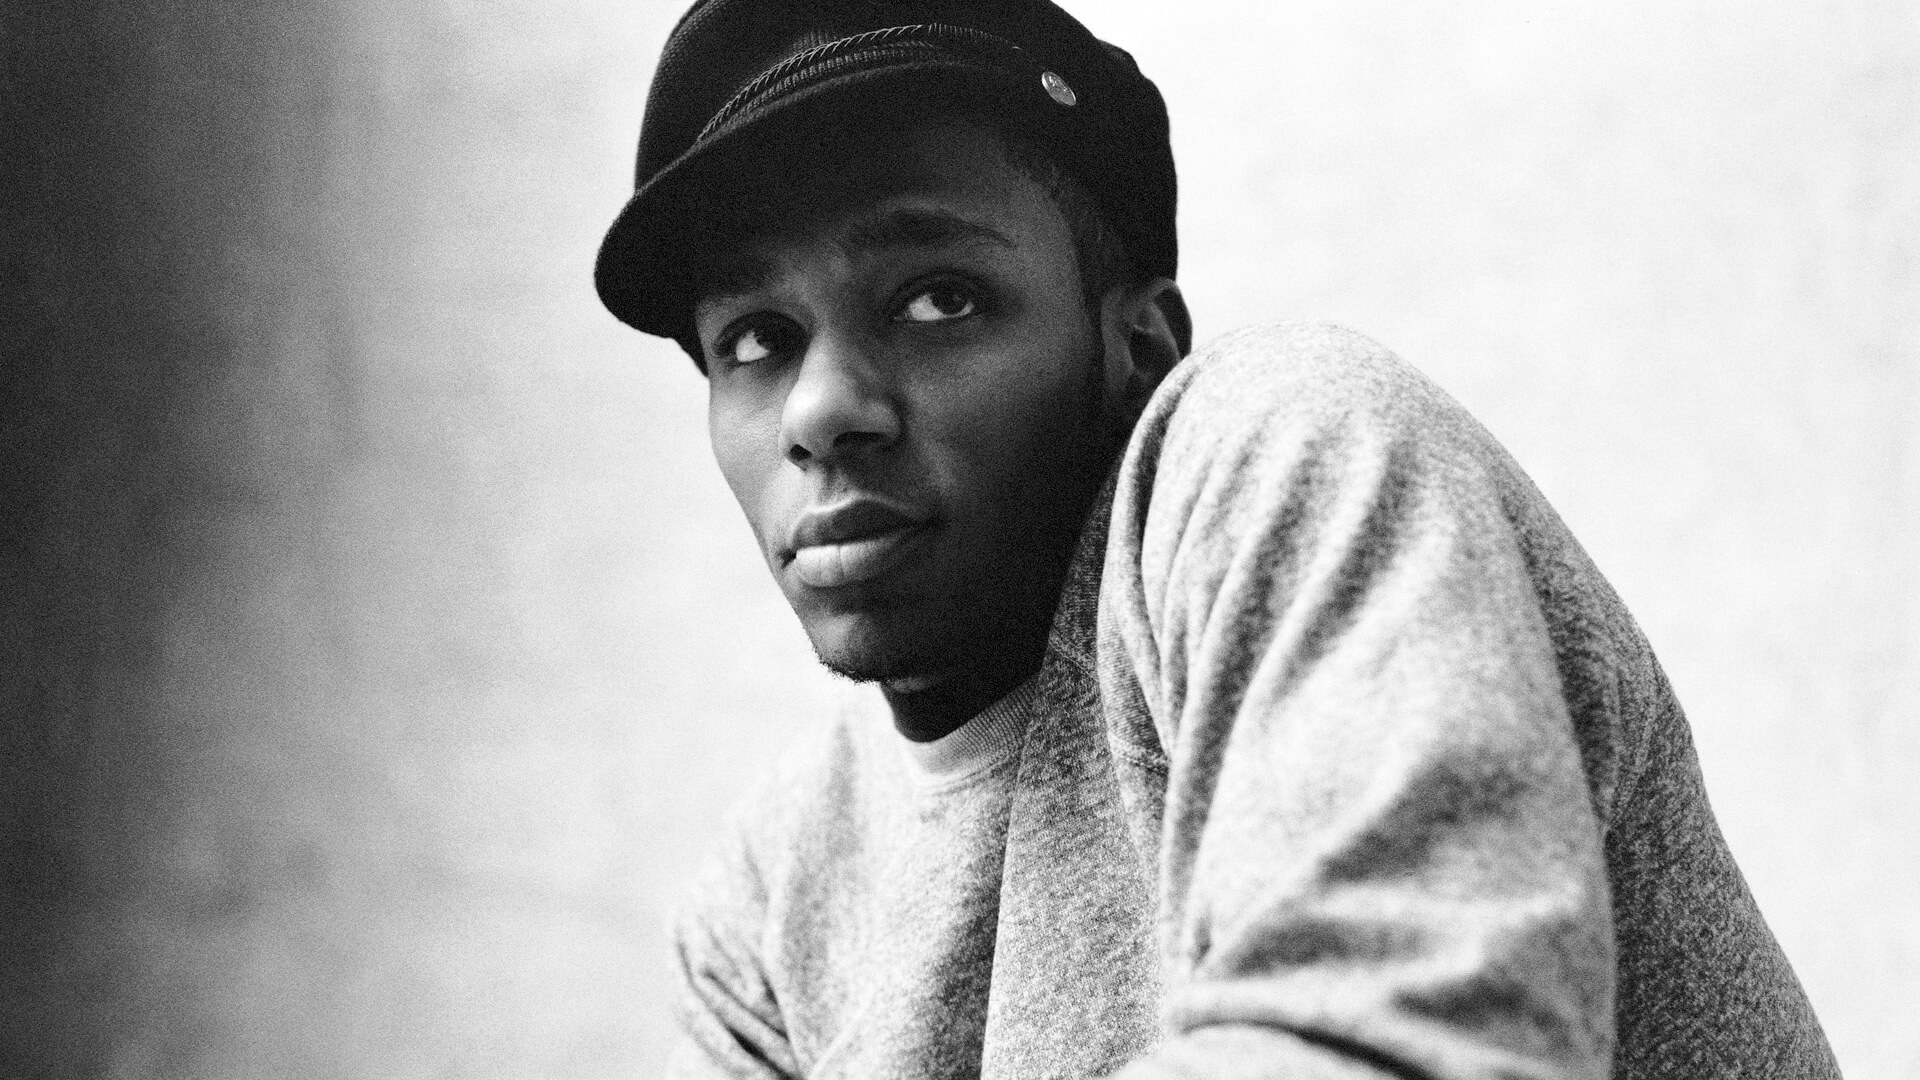 Mos Def Age, Net Worth, Height, Spouse, Wife, Songs & Movies